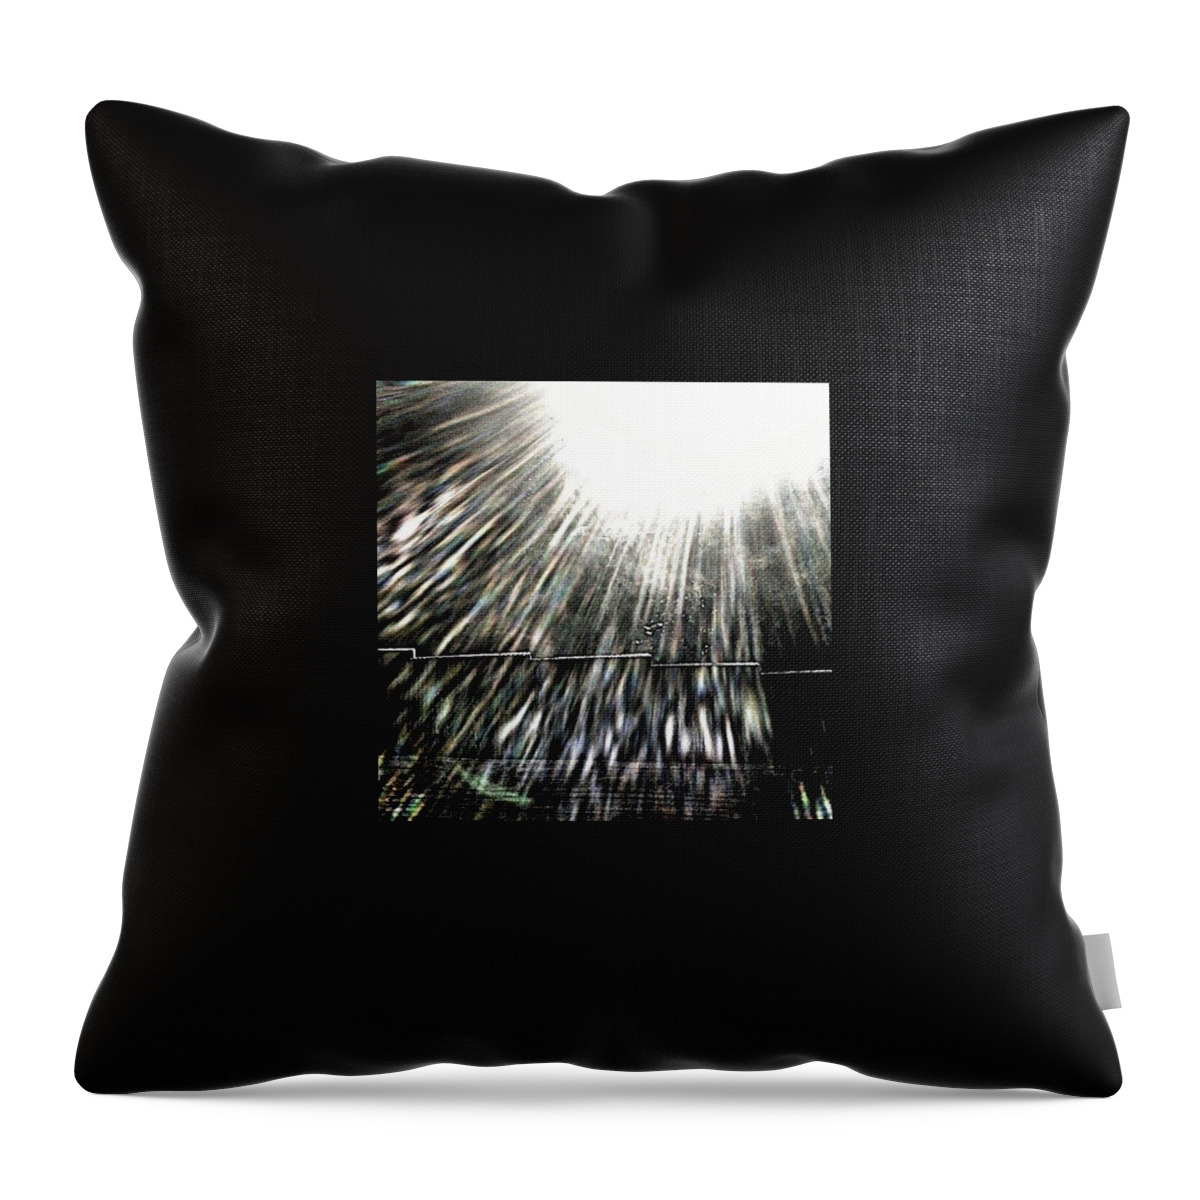 Beautiful Throw Pillow featuring the photograph Morning Light by Jason Roust